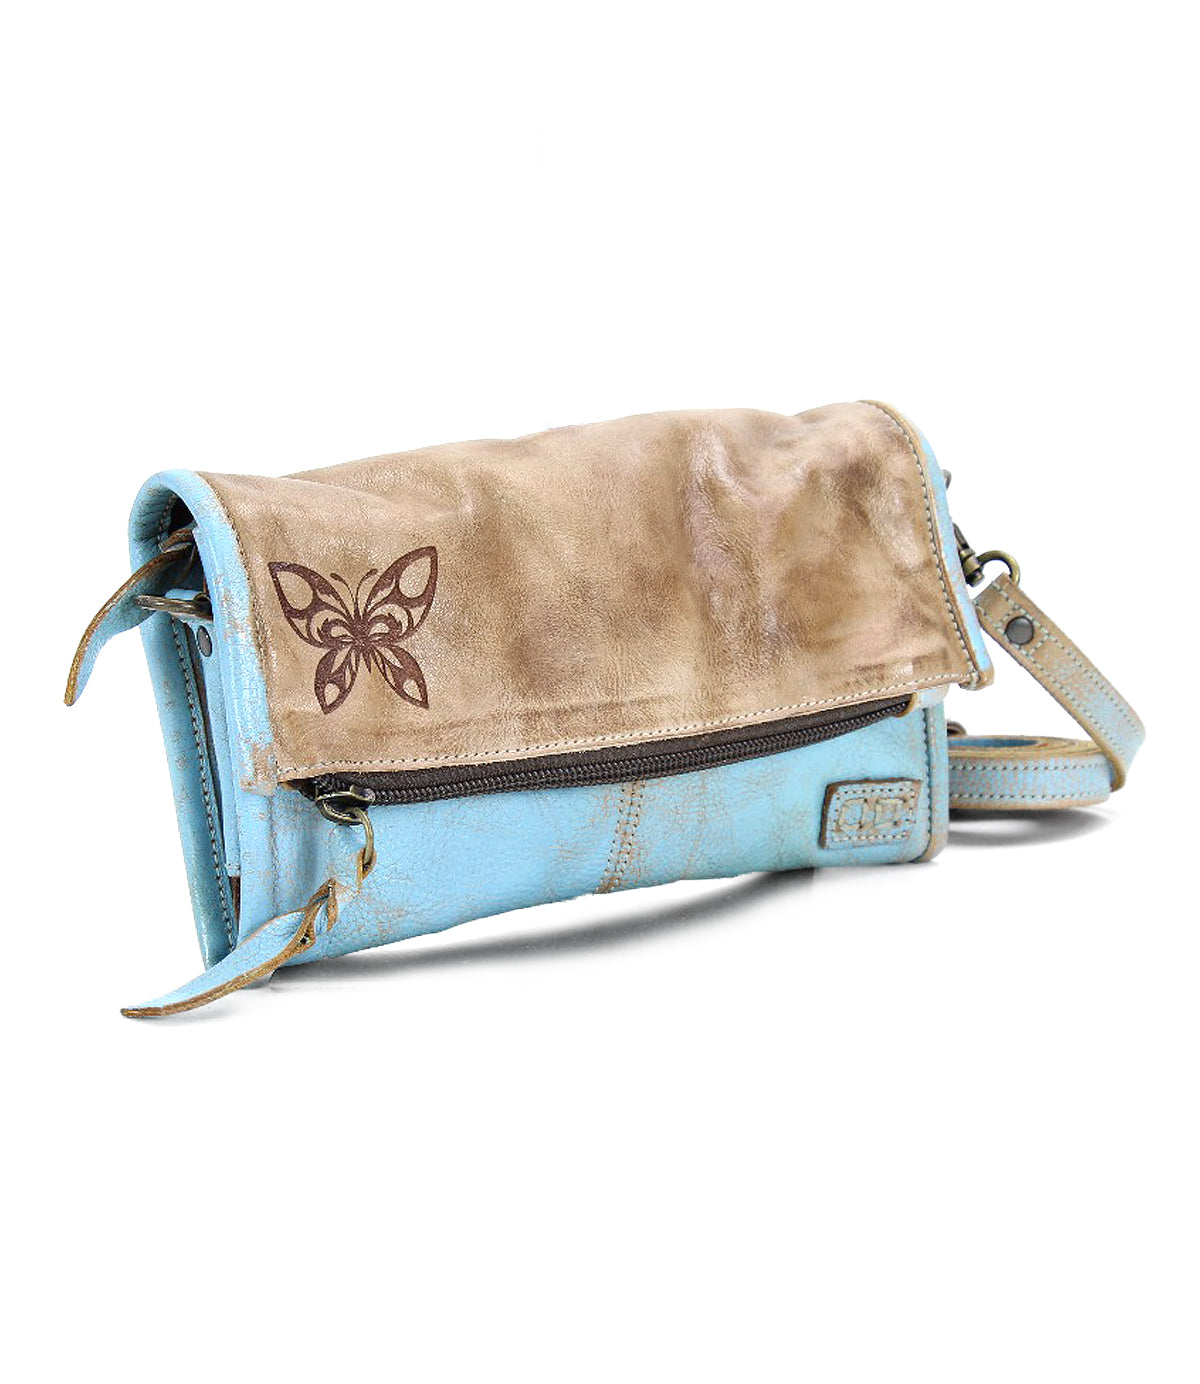 A multifunctional accessory with a butterfly design, this Amina II blue and brown purse from Bed Stu can also be worn as a crossbody bag.